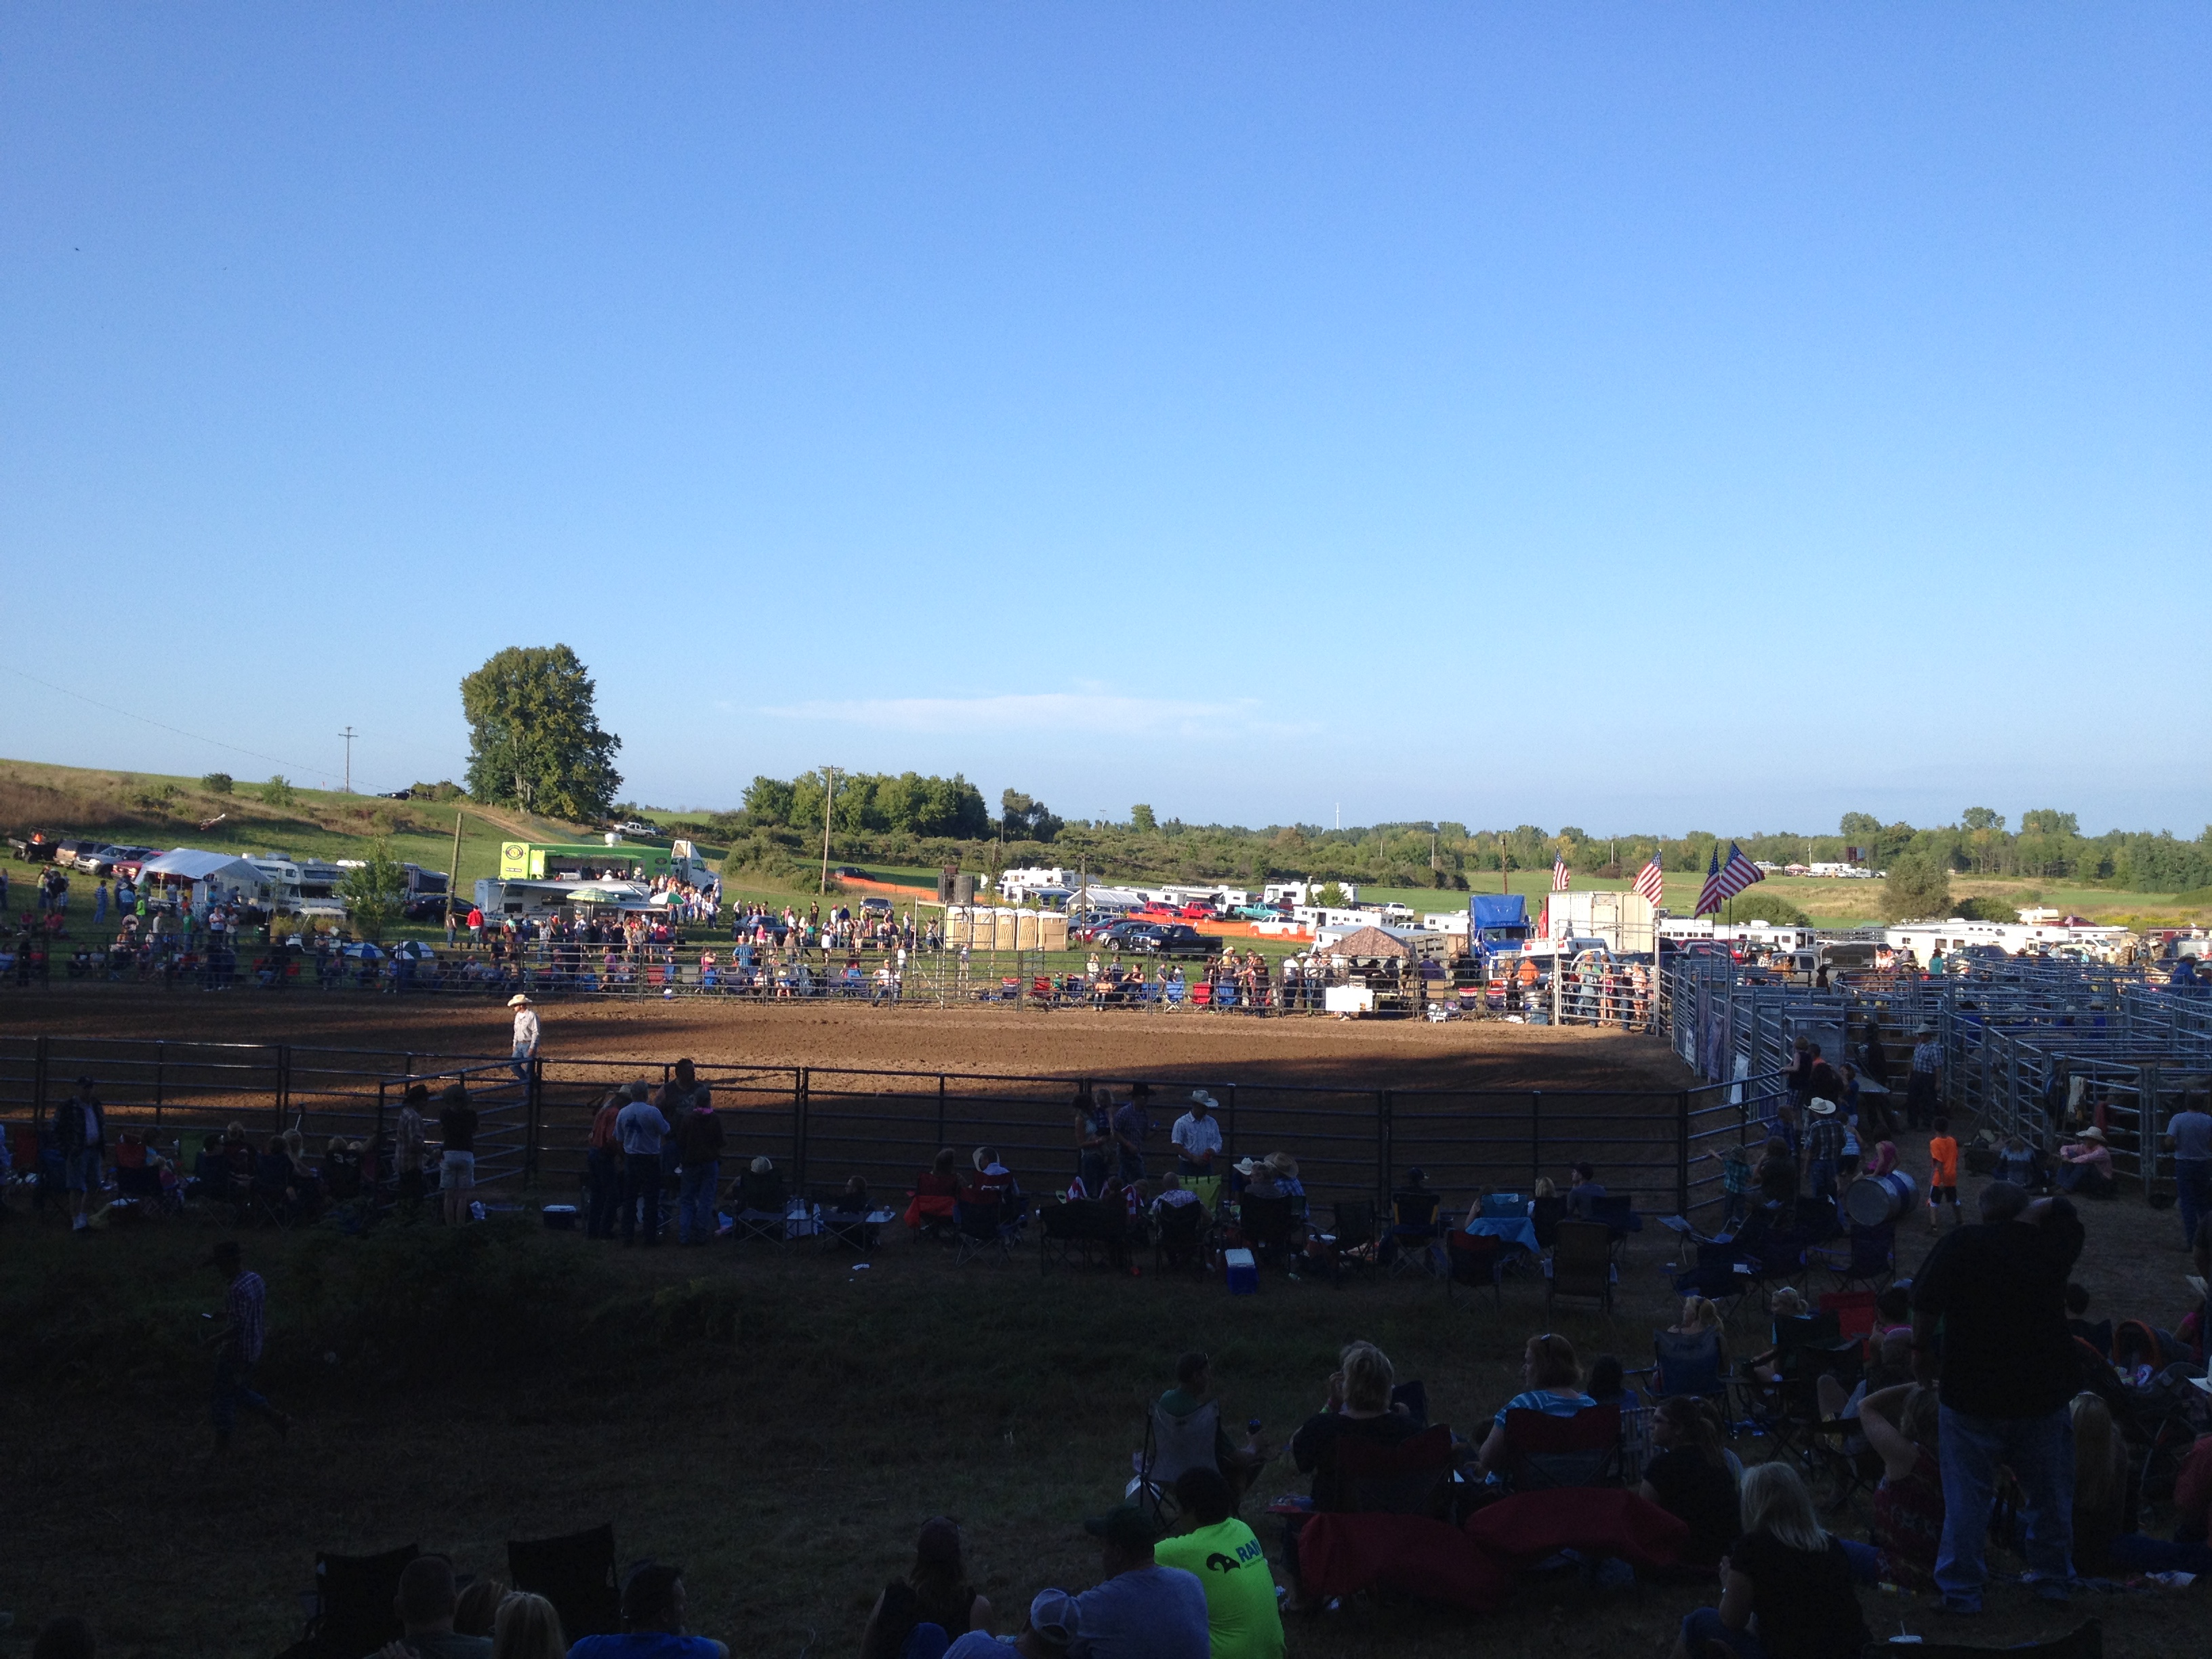 view of the first night of Rodeo